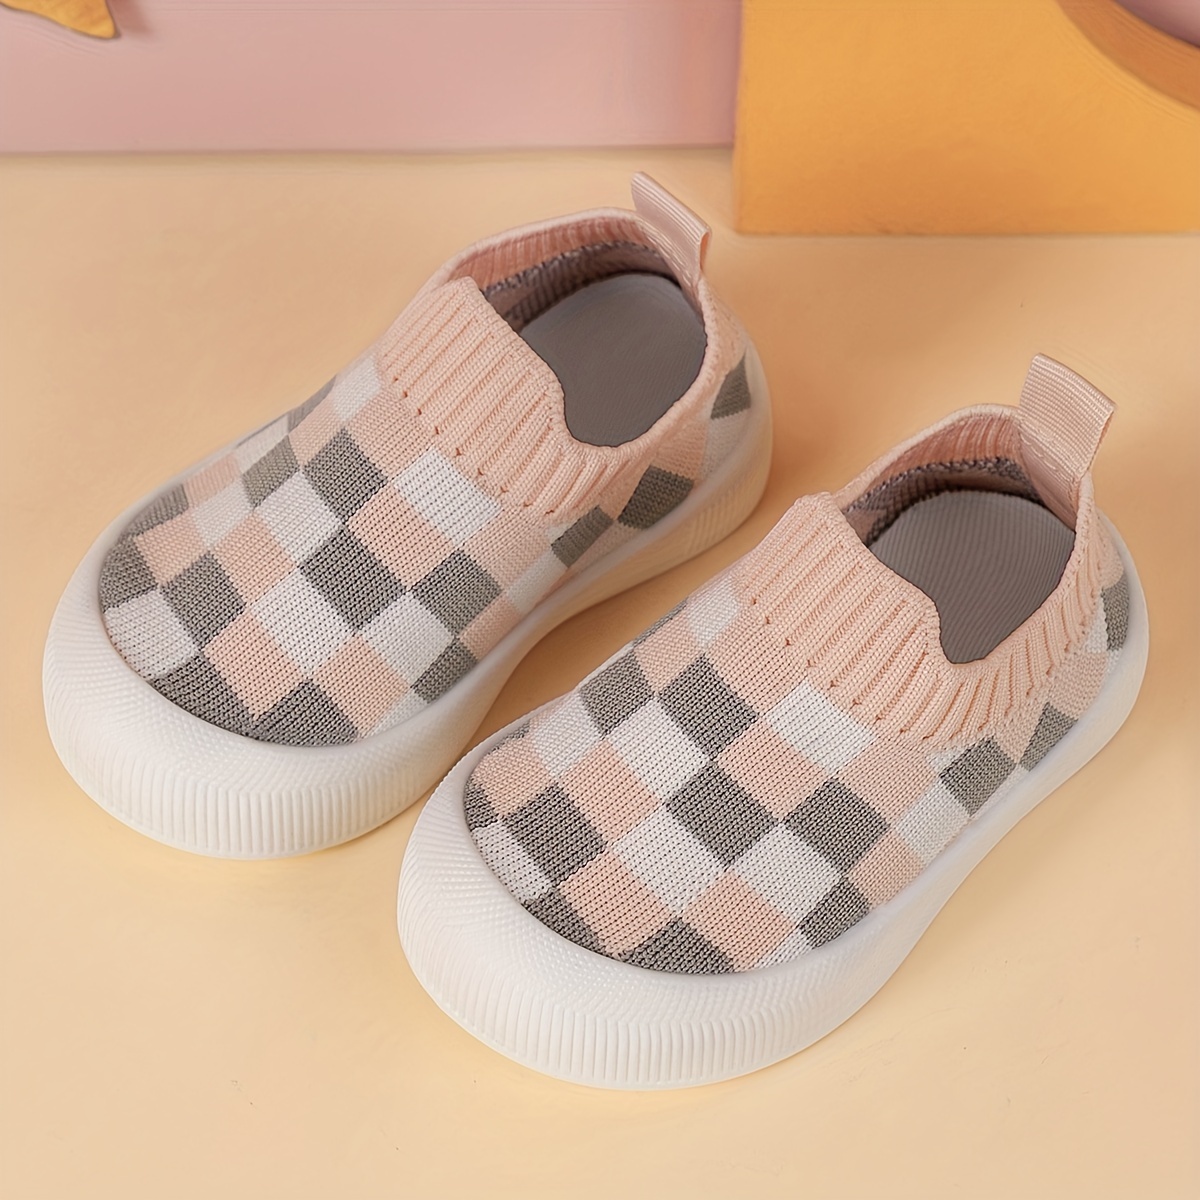 

Casual Low Top Slip On Woven Shoes For Baby Girls, Breathable Lightweight Walking Shoes For All Seasons